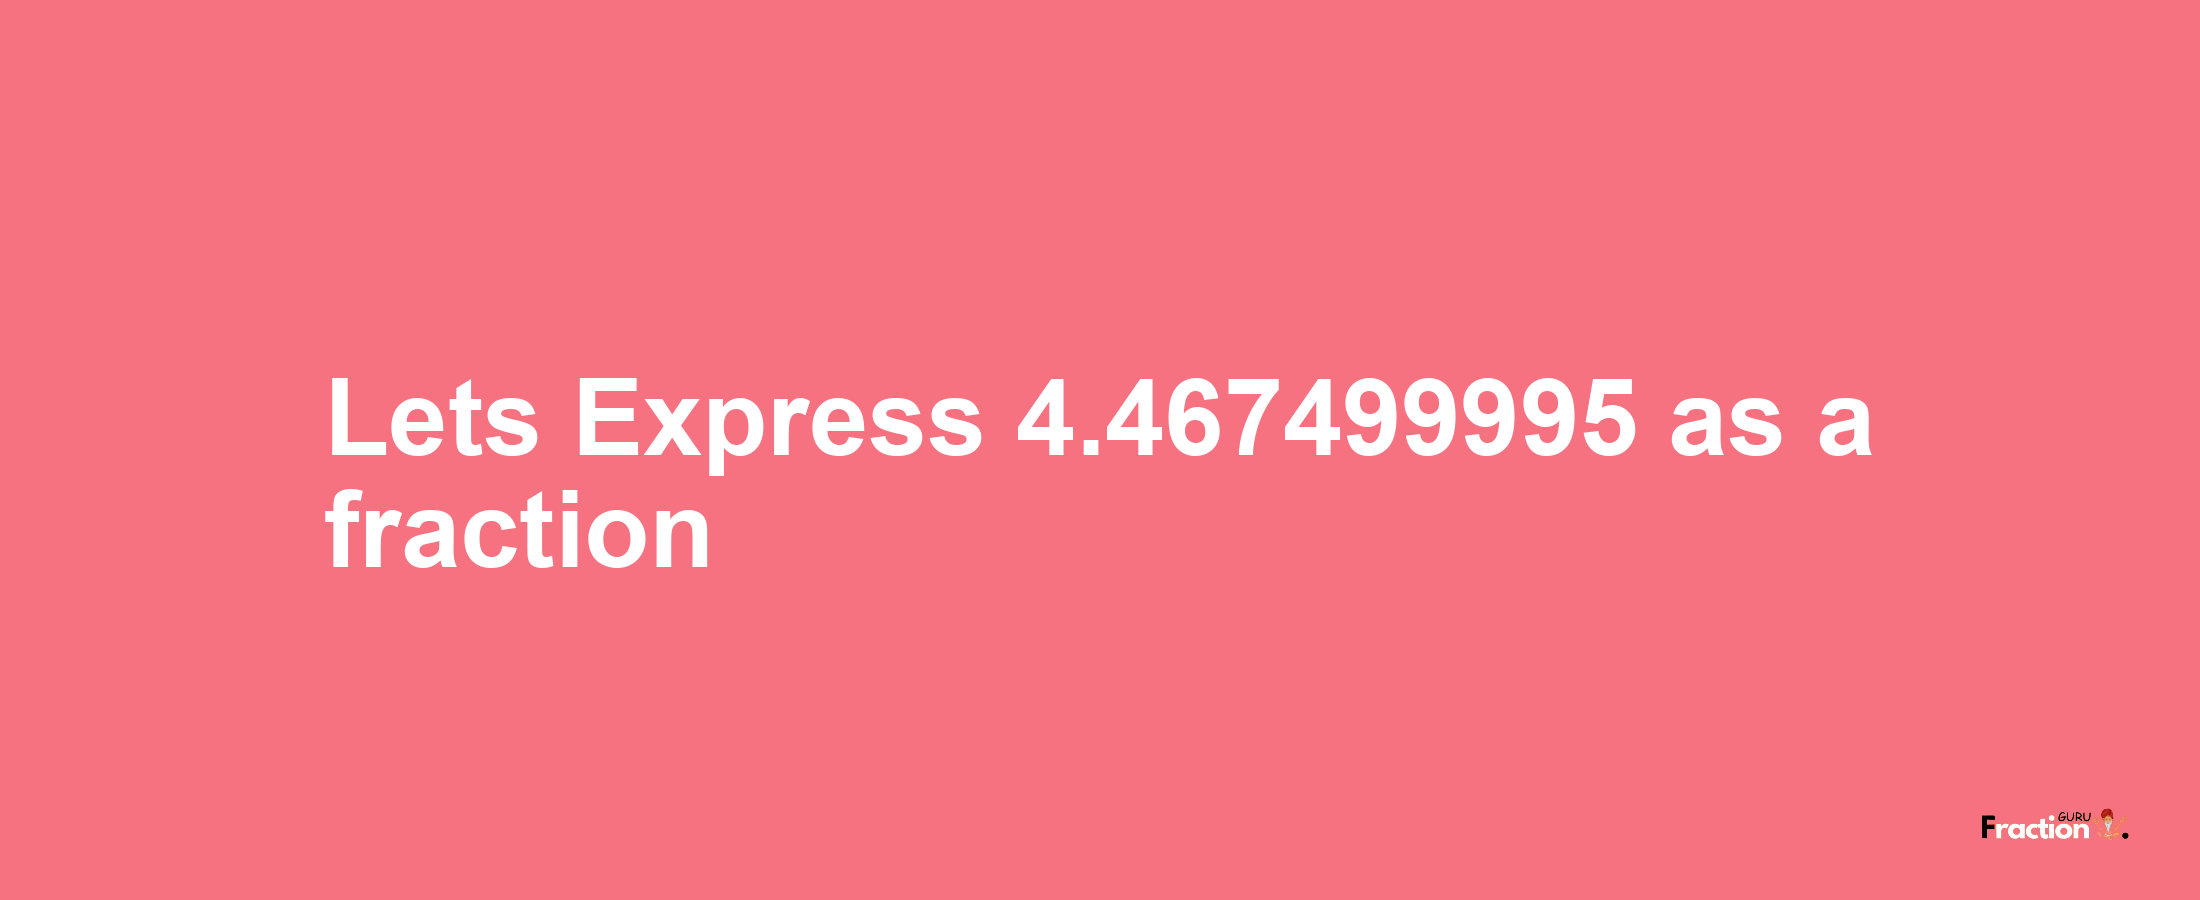 Lets Express 4.467499995 as afraction